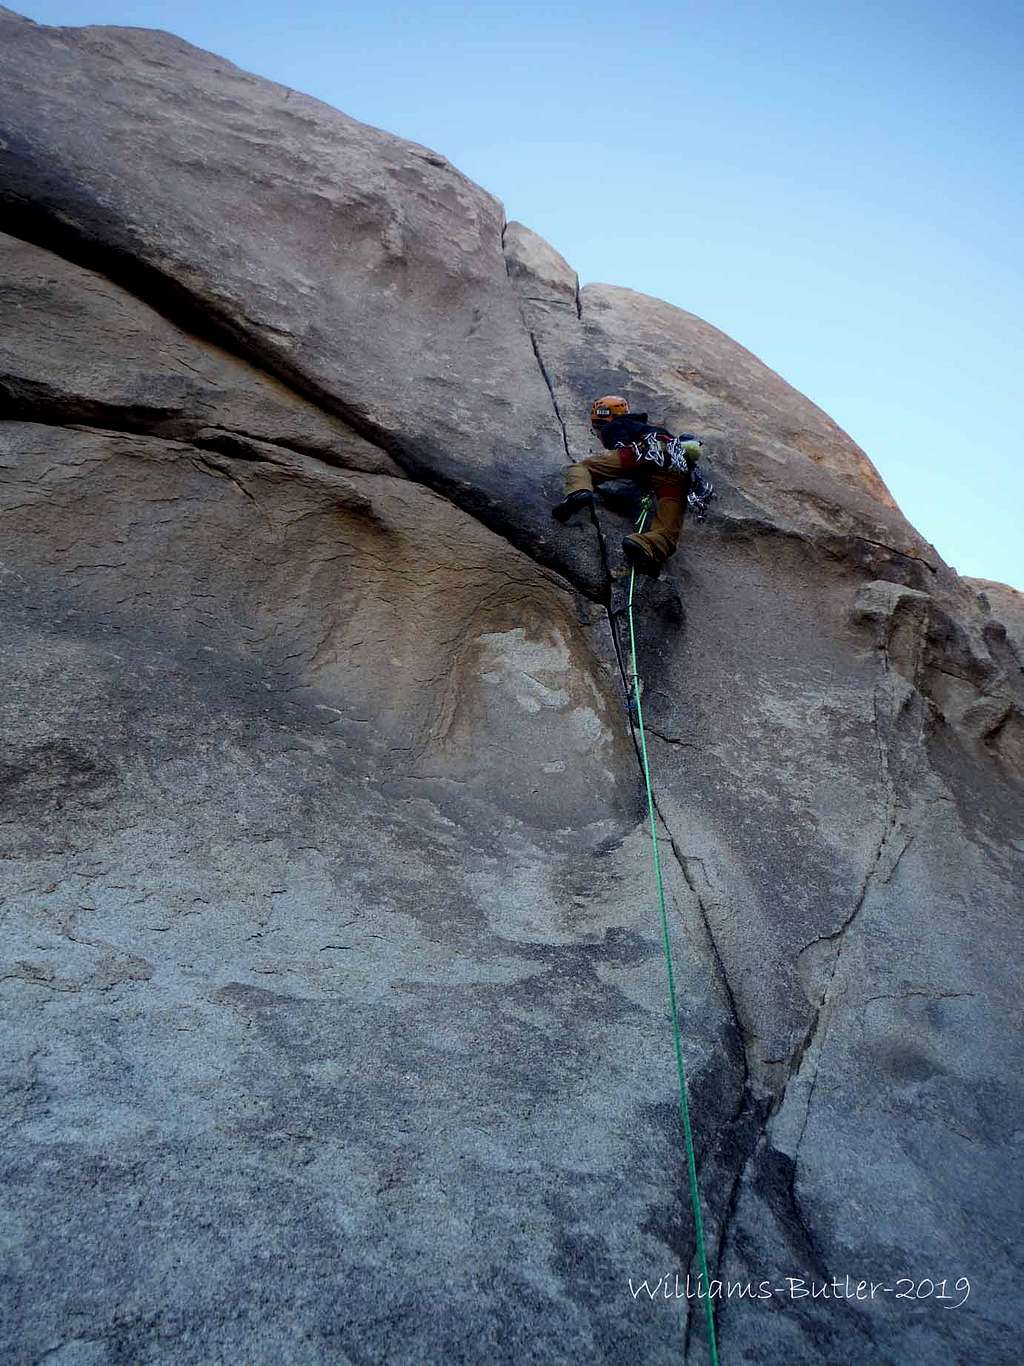 Dow leading Right Baskerville Crack, 5.10a**